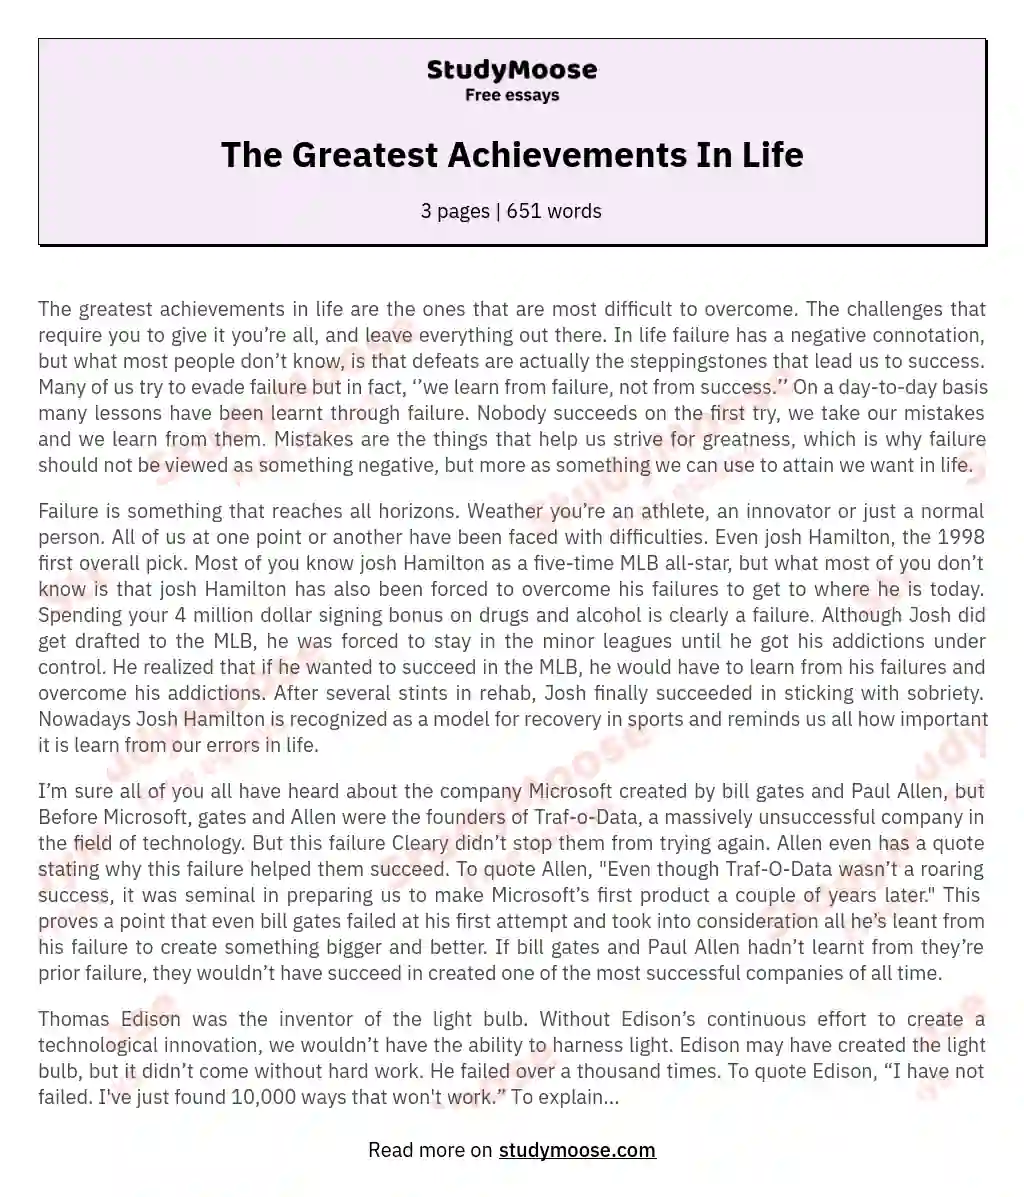 The Greatest Achievements In Life essay